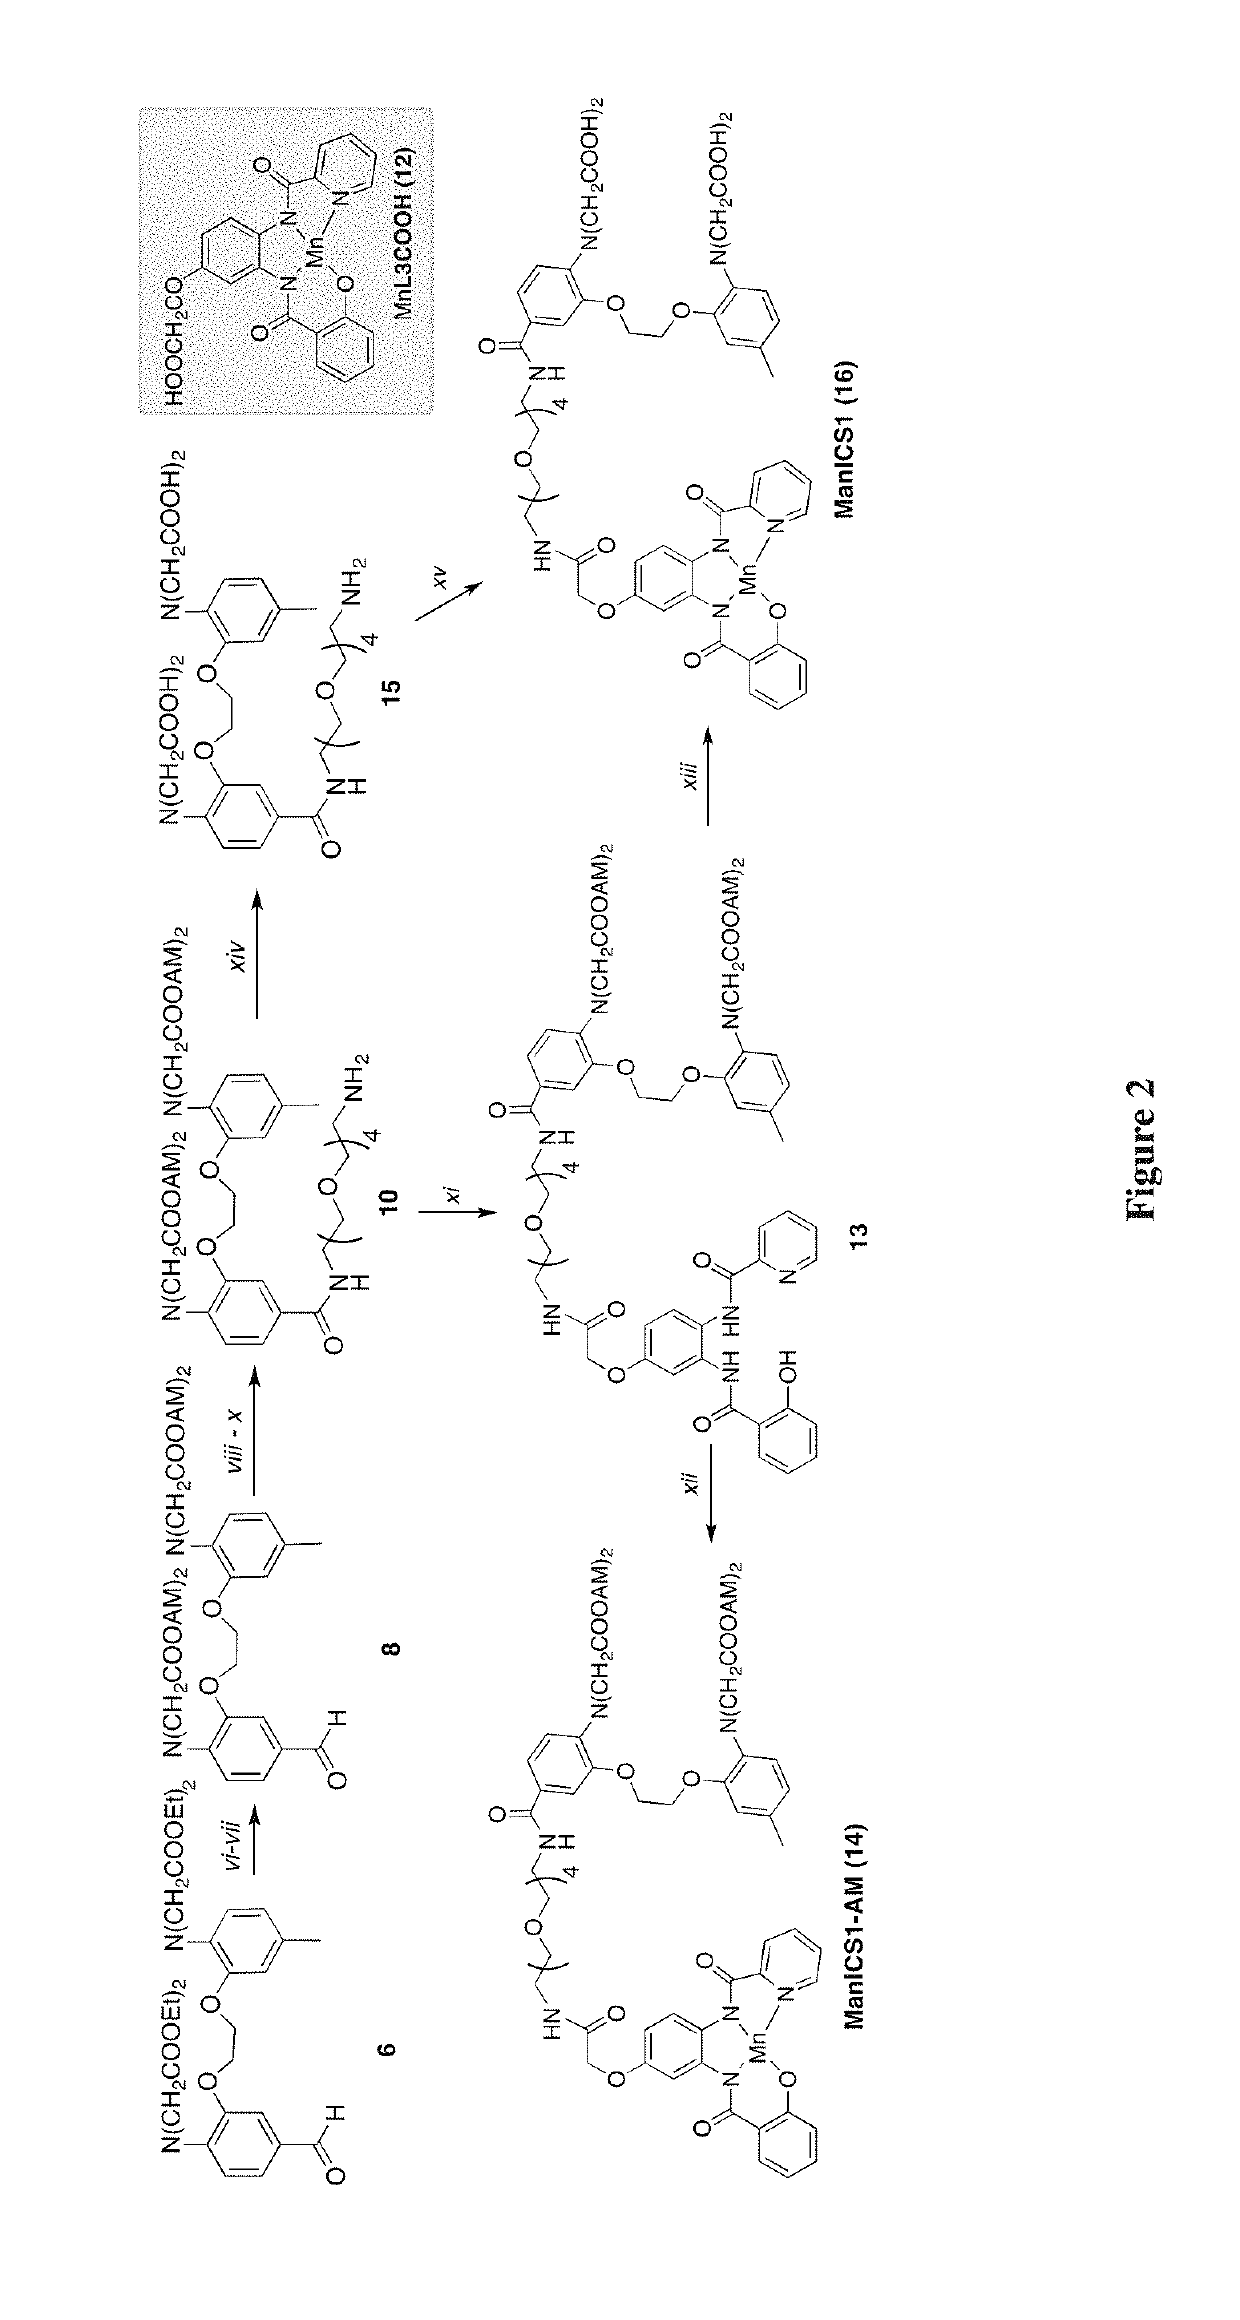 Cell-permeable imaging sensors and uses thereof